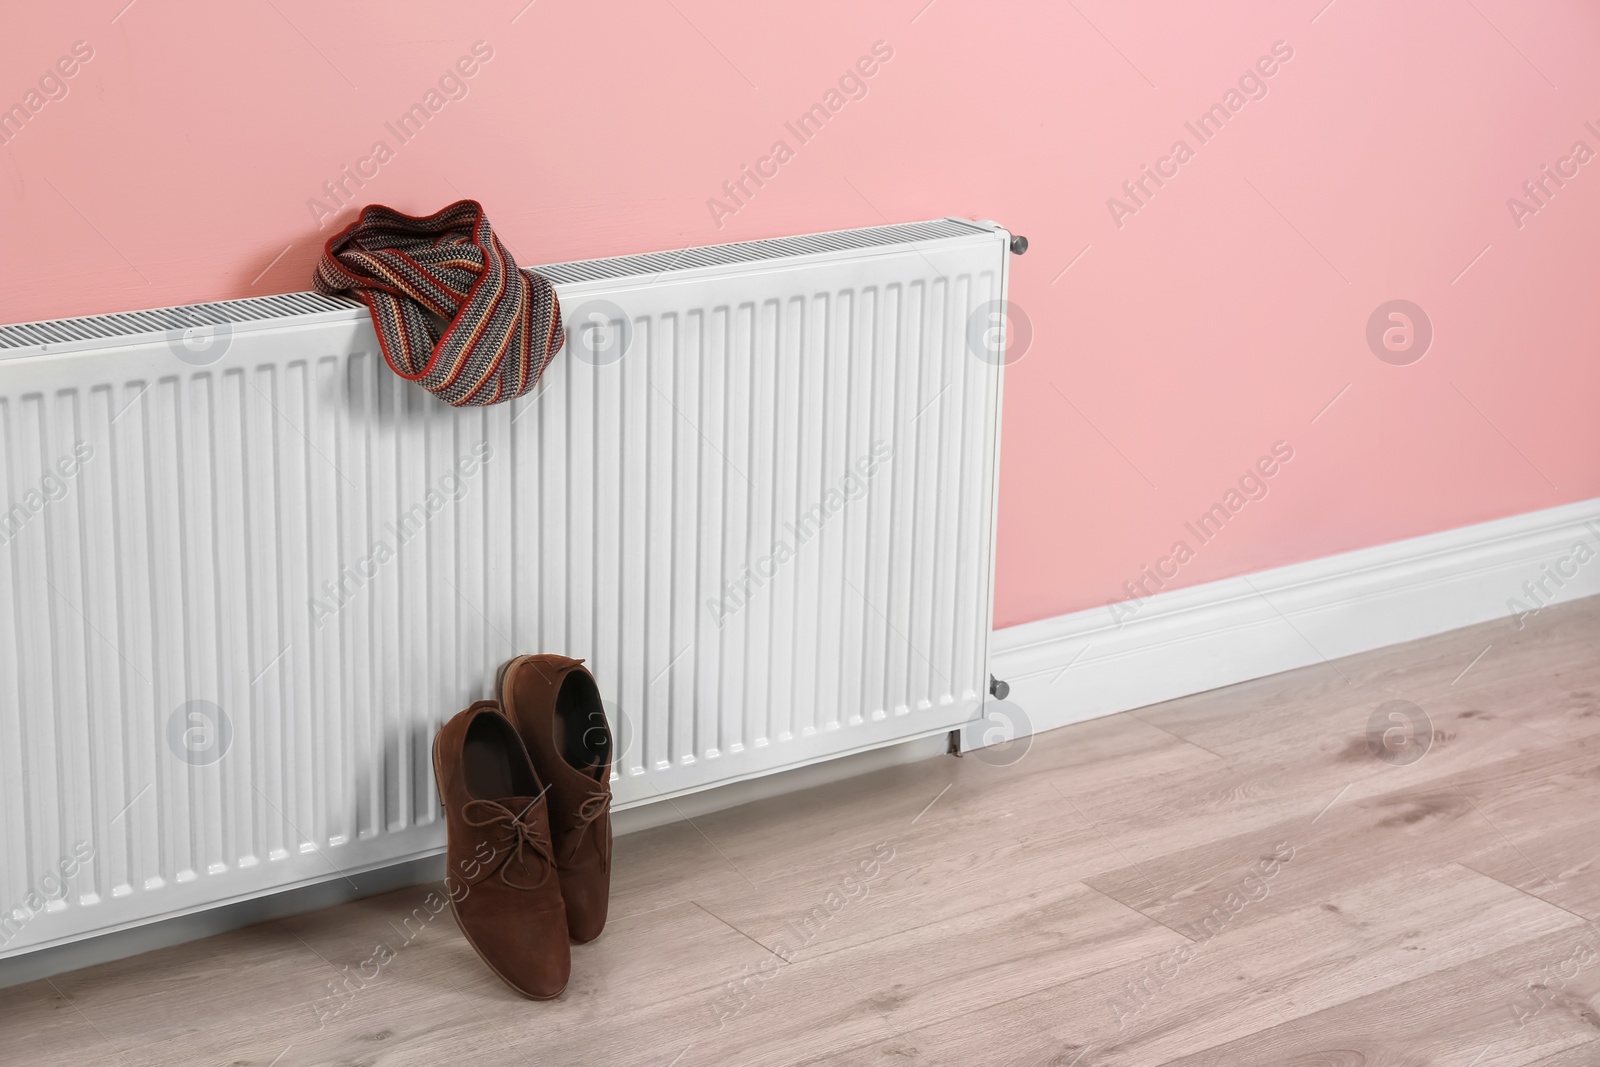 Photo of Heating radiator with scarf and shoes near color wall, Space for text